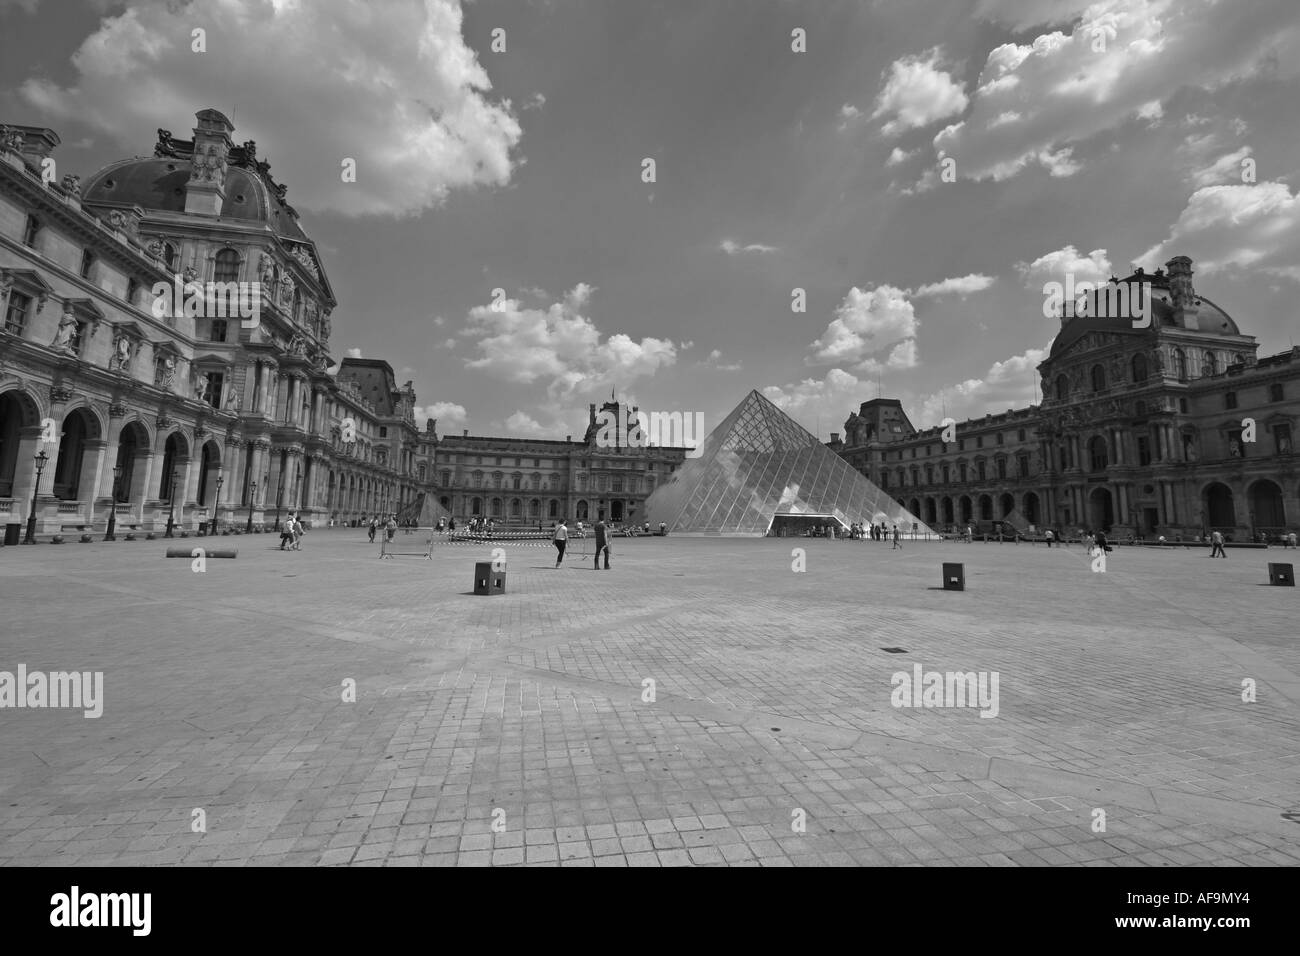 A Stock Photograph of the Louvre Museum s Pyramid in Black and White Stock Photo